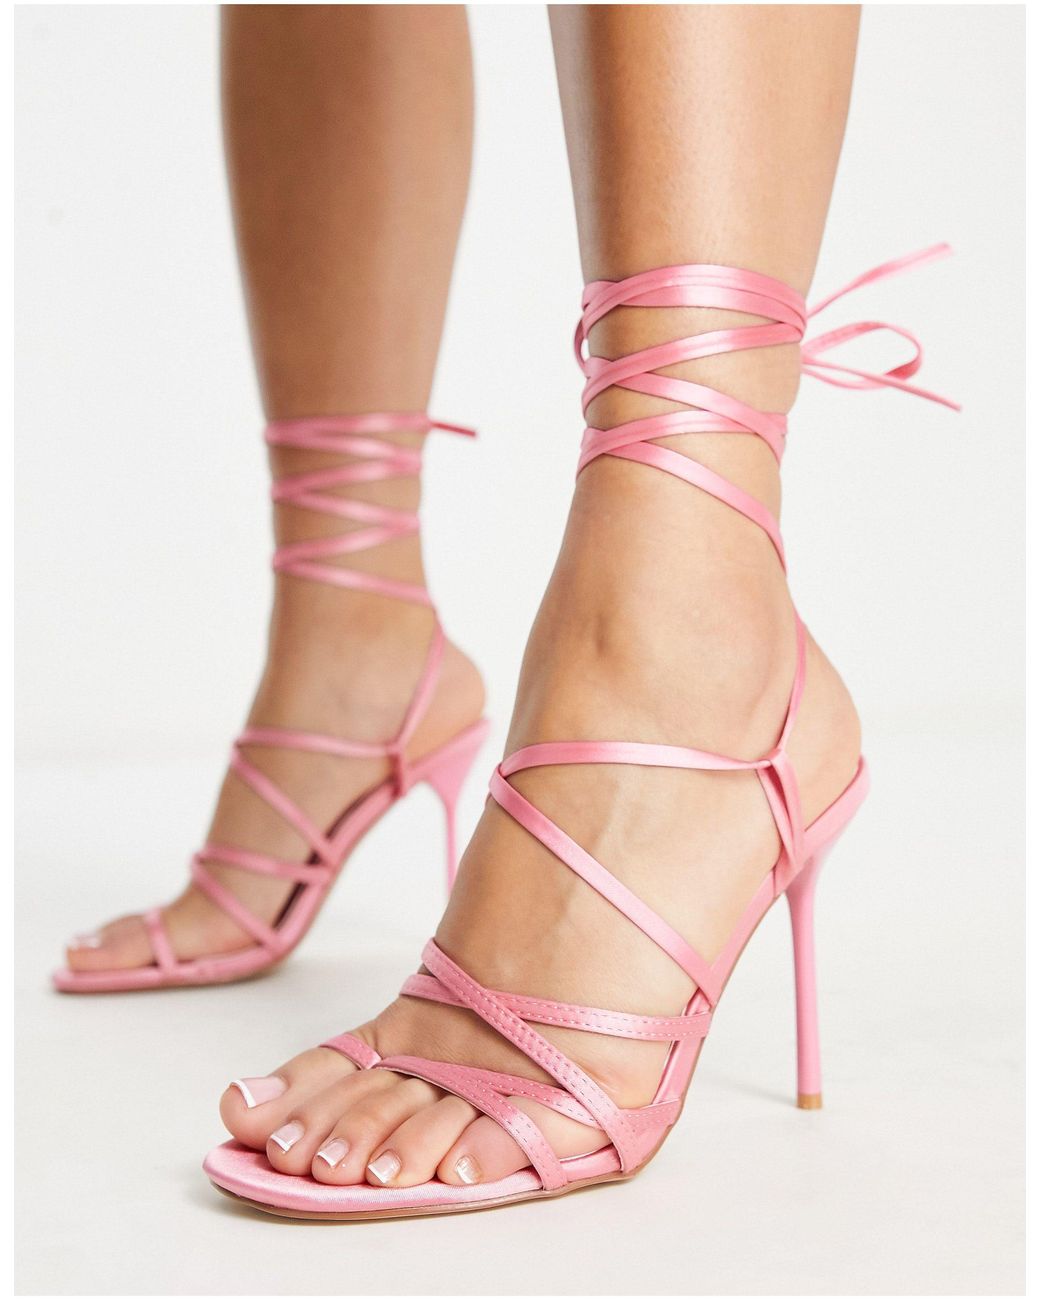 Simmi Shoes Simmi London Una Tie Ankle Satin Sandals In Pink Lyst Canada